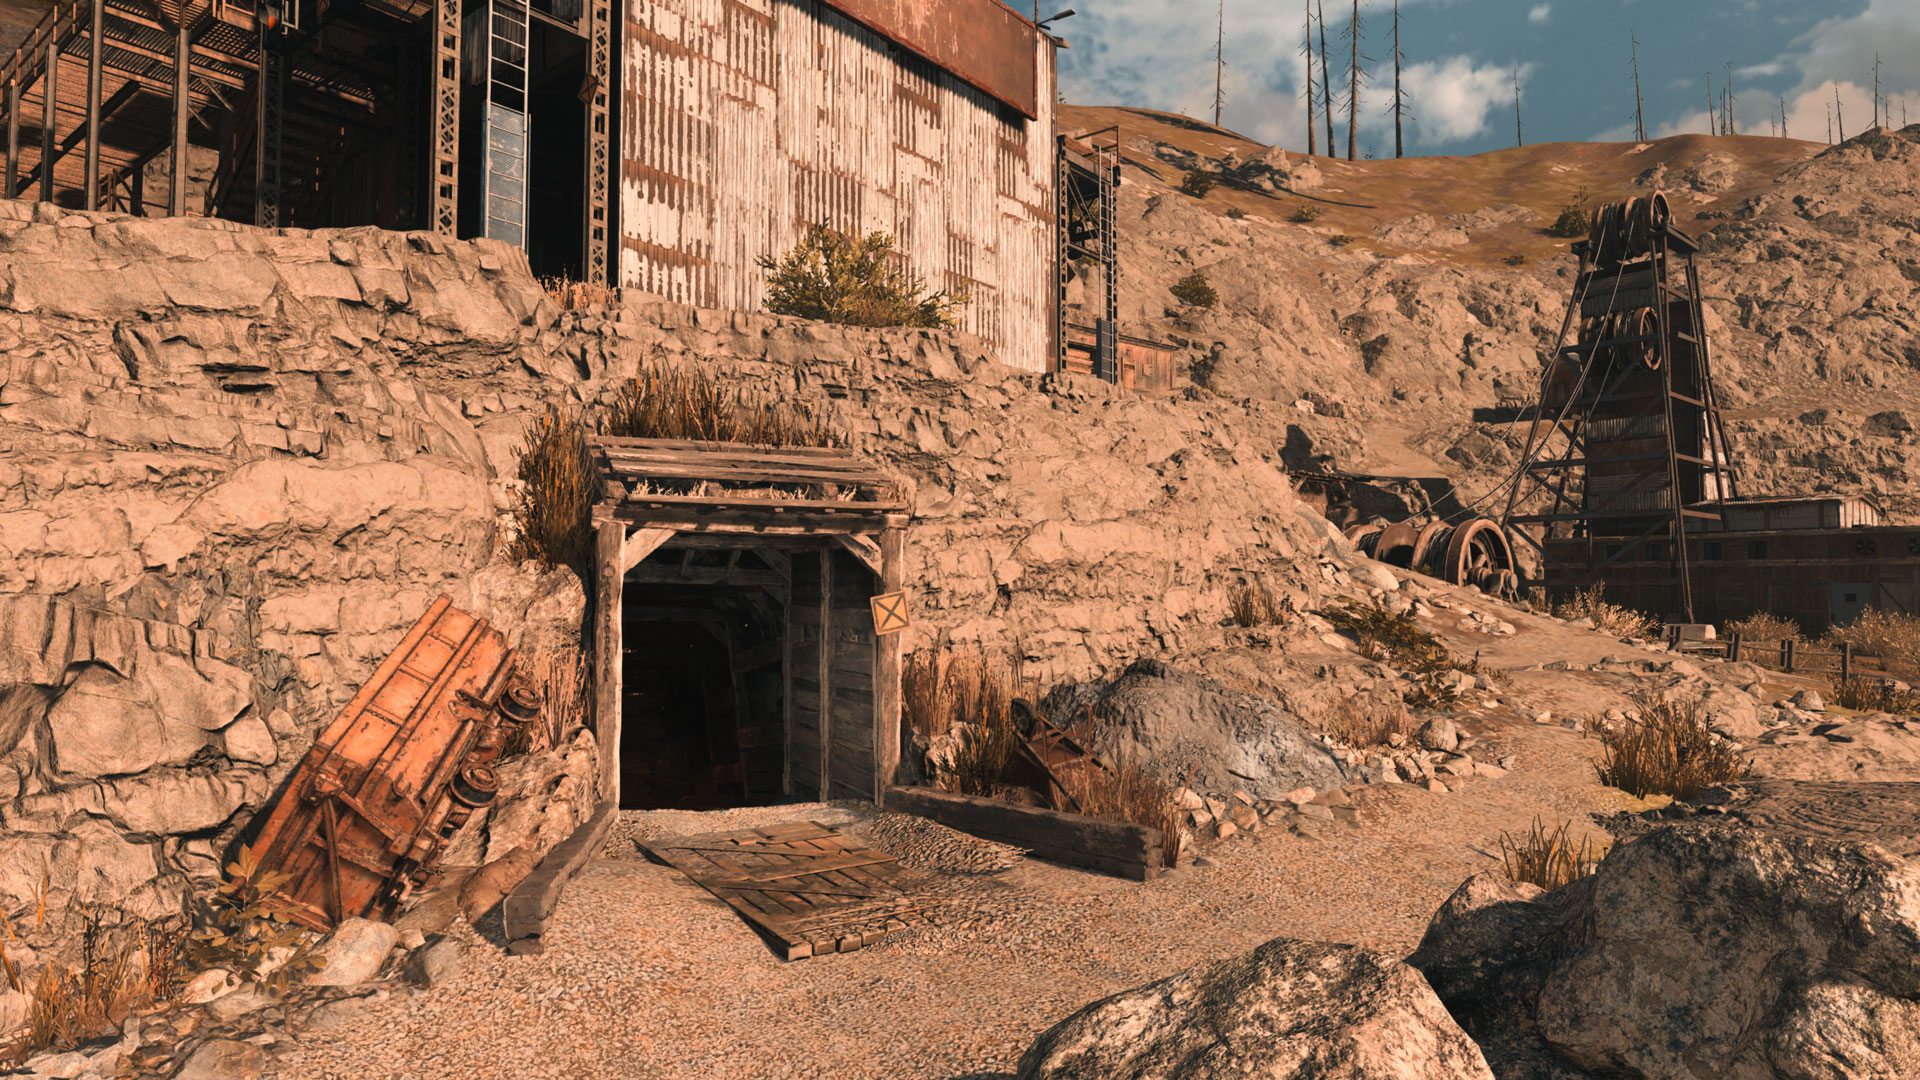 A mineshaft entrance at the Old Mine location in Warzone